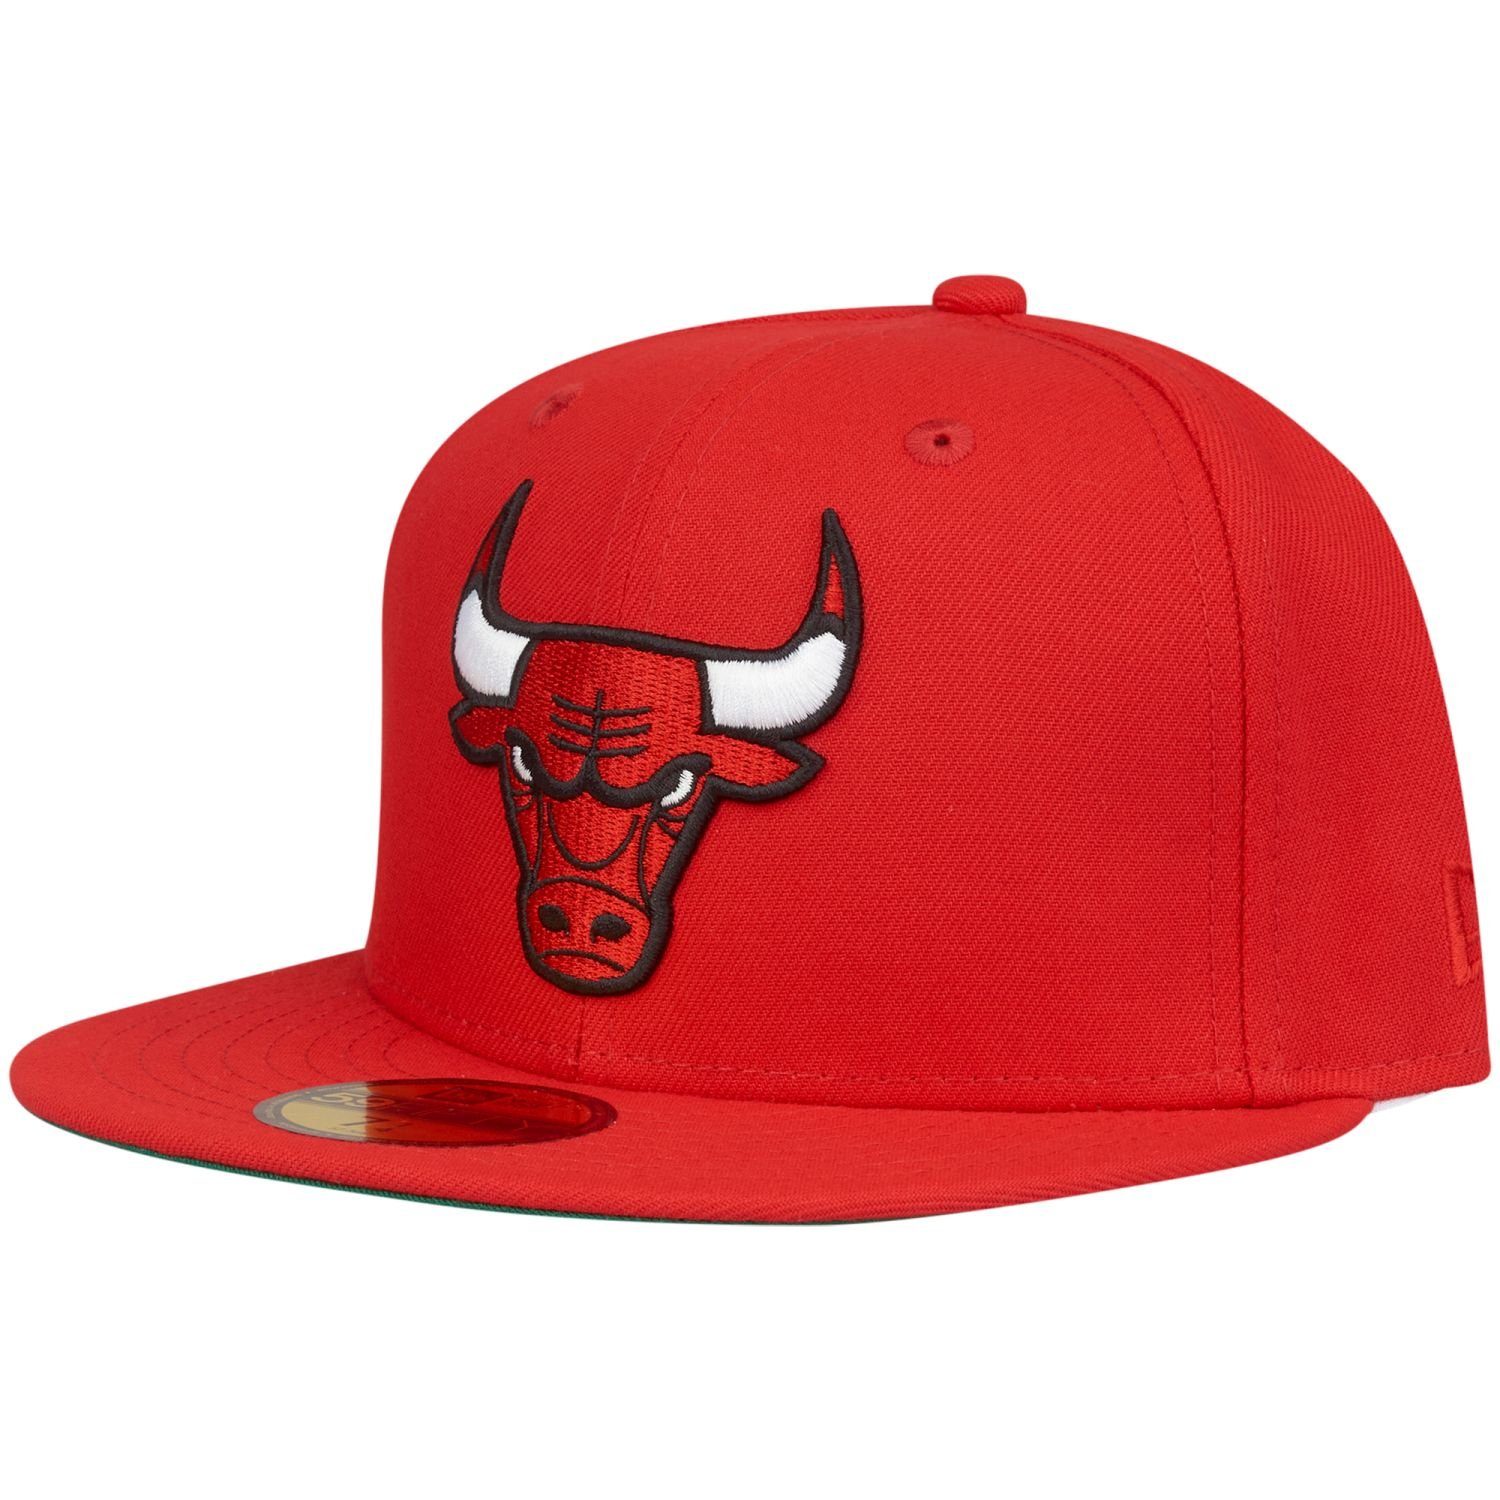 Authentisch! New Era Fitted Cap Chicago 59Fifty Bulls NBA